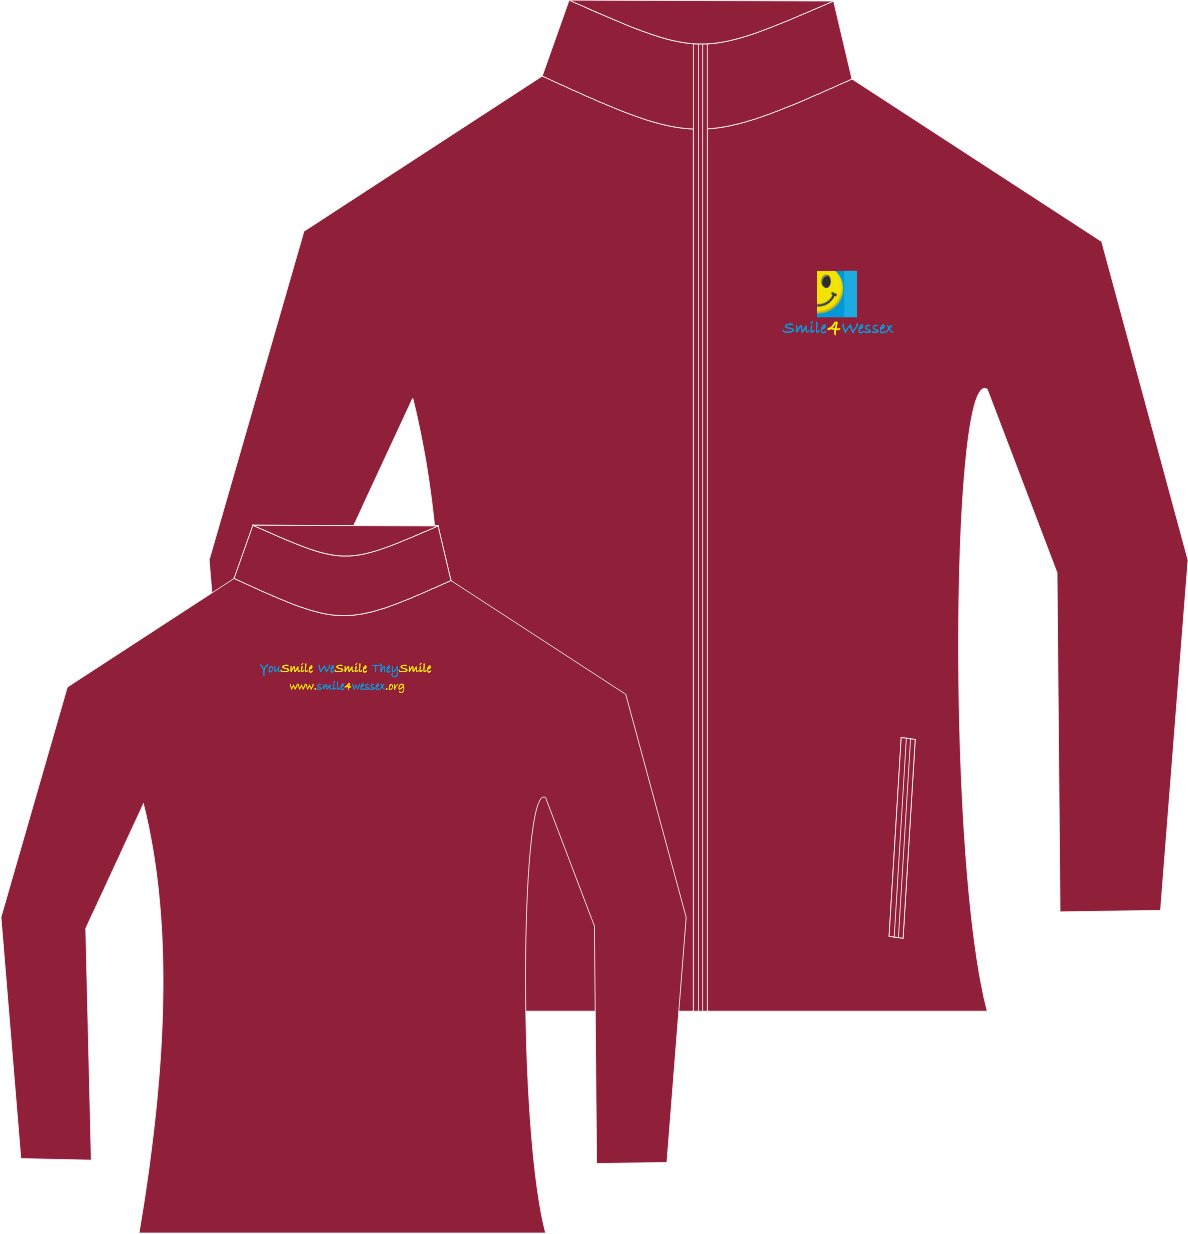 Made from 280gsm Polyester Microfibre, with
full length zips and two zipped pockets, these
Henbury Micro Fleece Jackets are ideal for 
those chilly evenings. Embroidered Logo/Text.

Please allow 14 days for manufacture & delivery

Postage Included